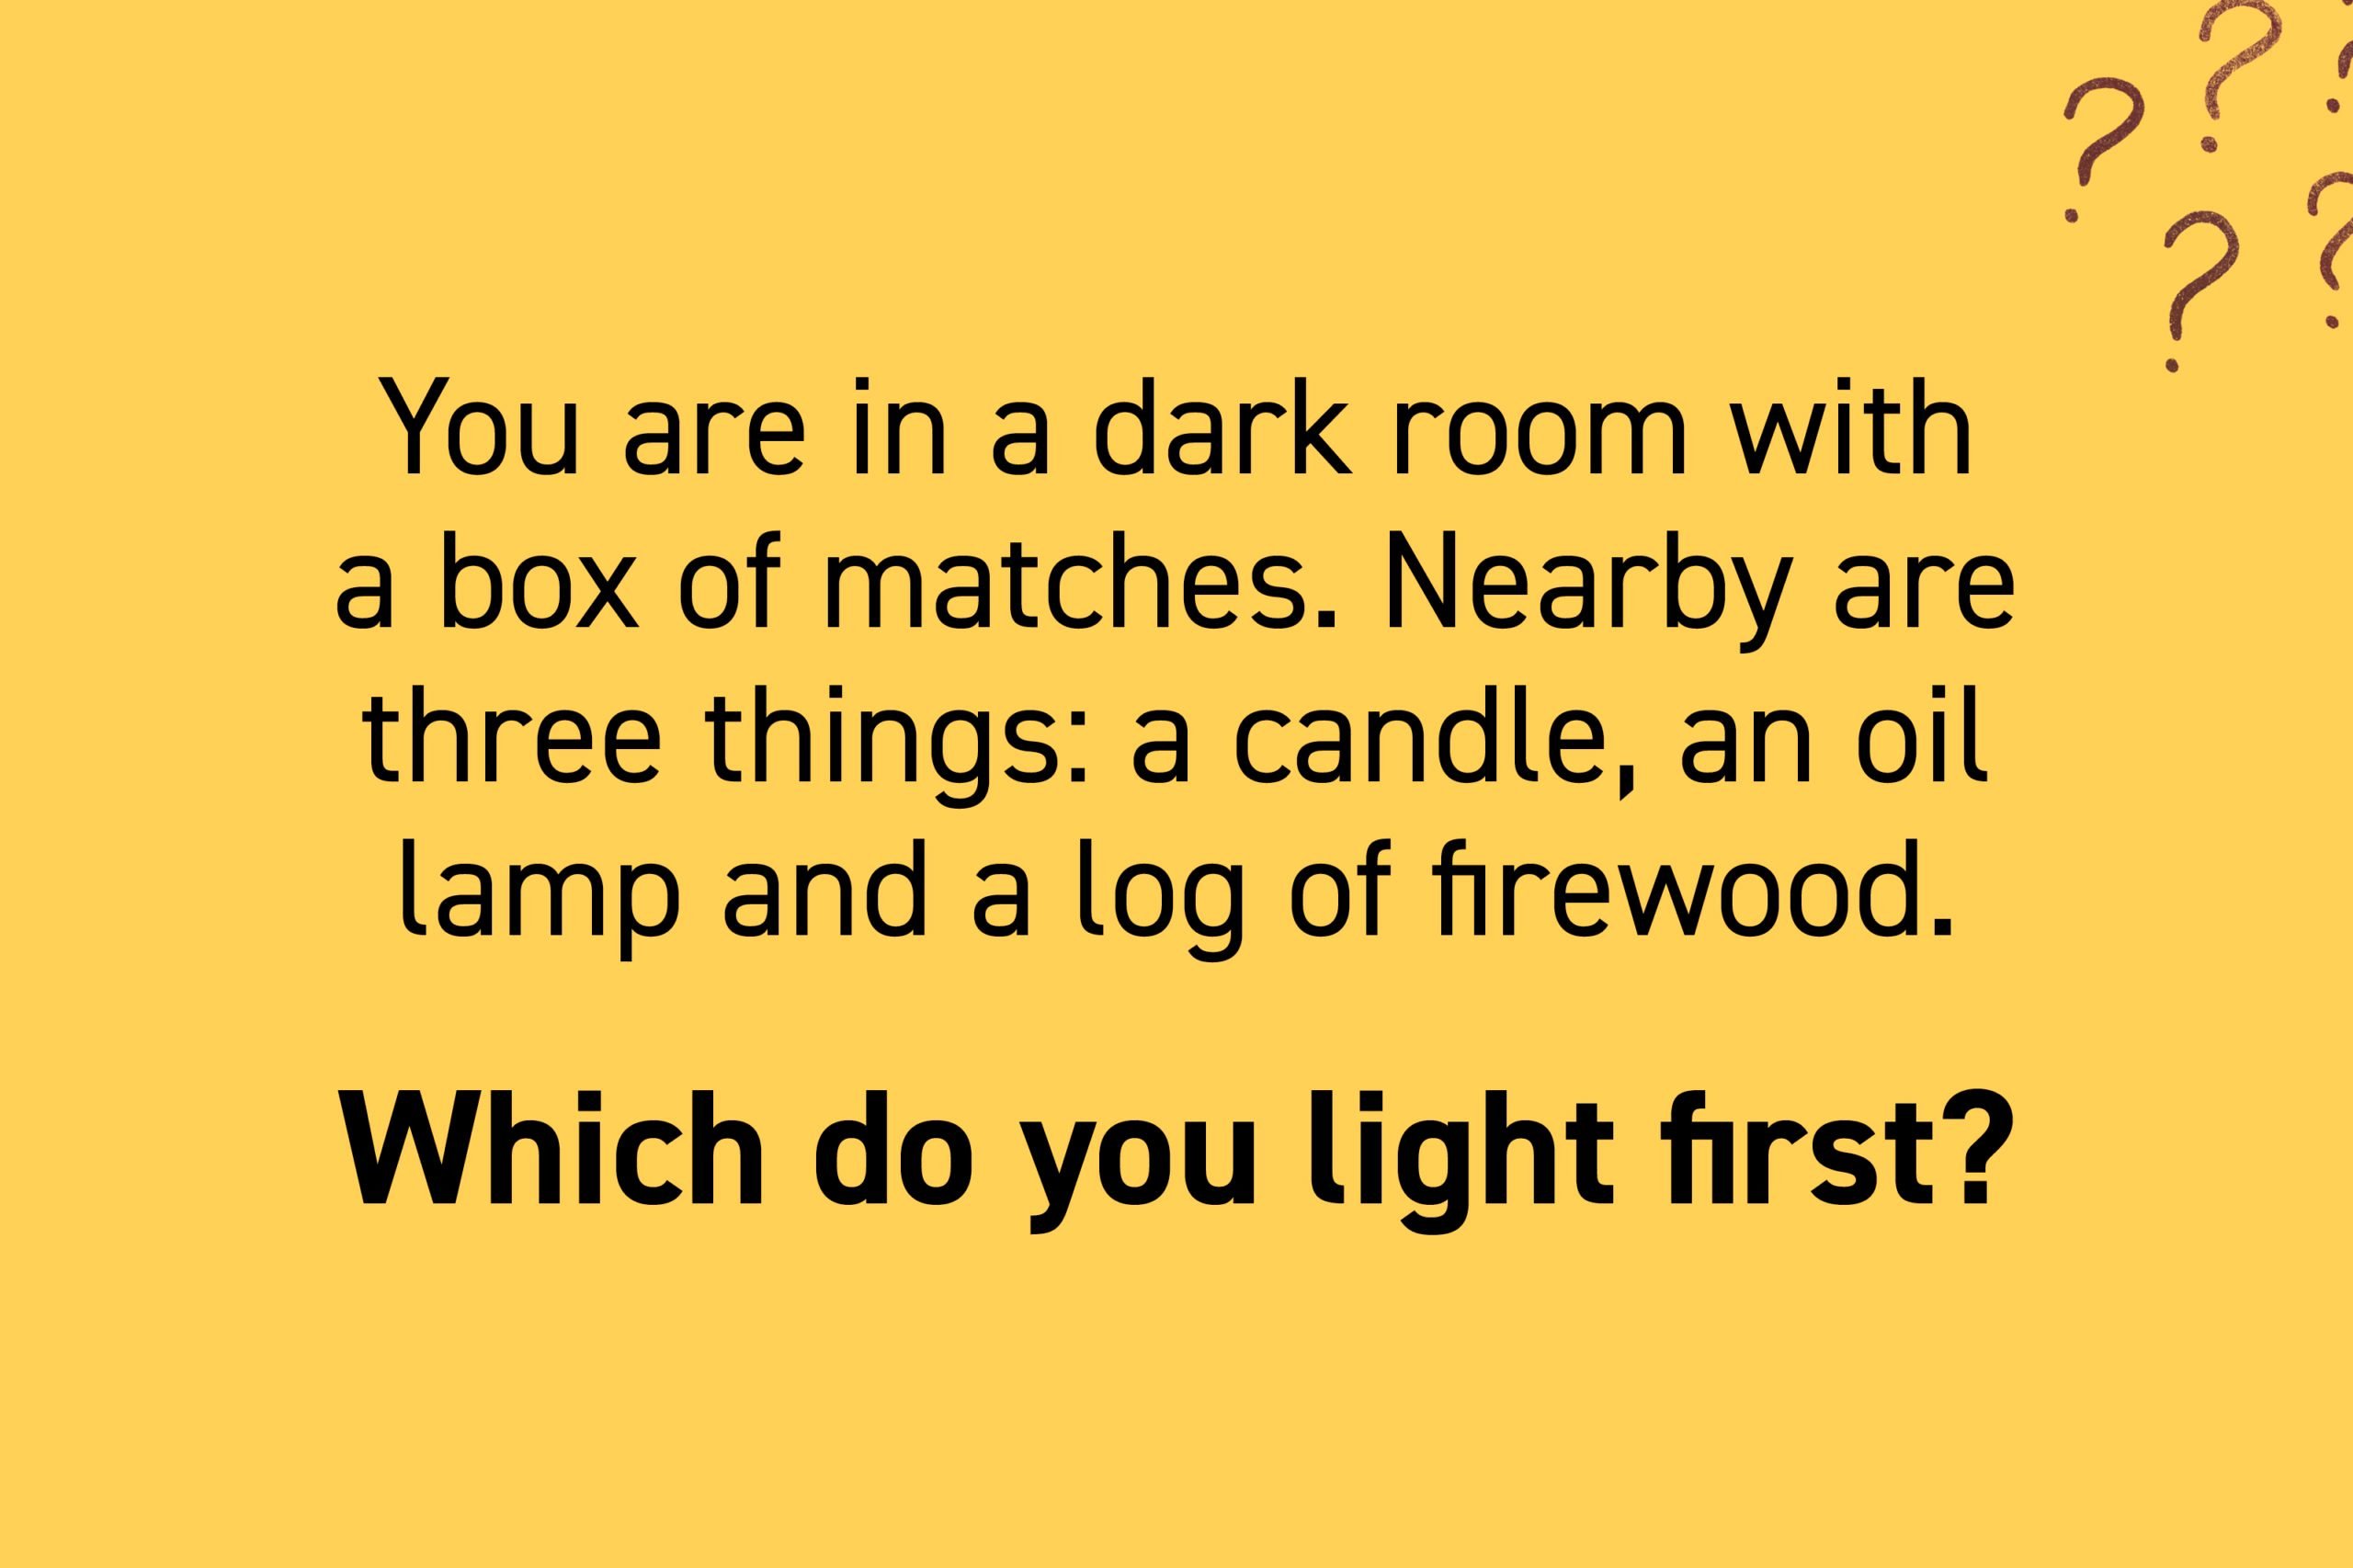 You are in a dark room with a box of matches. Nearby are three things: a candle, an oil lamp and a log of firewood. Which do you light first?